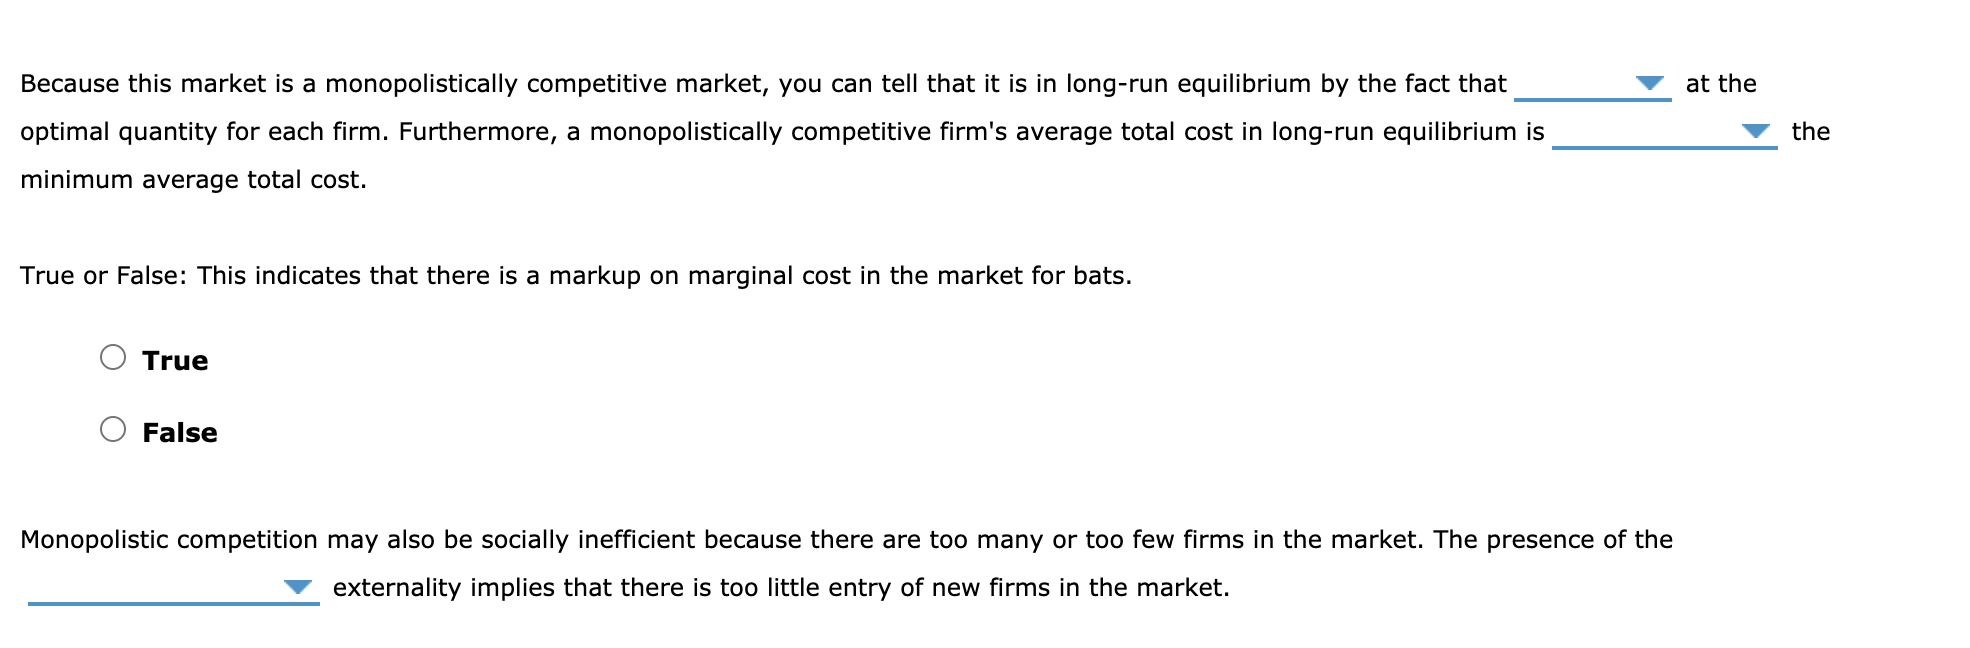 Because this market is a monopolistically competitive market, you can tell that it is in long-run equilibrium by the fact that
at the
optimal quantity for each firm. Furthermore, a monopolistically competitive firm's average total cost in long-run equilibrium is
the
minimum average total cost.
True or False: This indicates that there is a markup on marginal cost in the market for bats.
True
False
Monopolistic competition may also be socially inefficient because there are too many or too few firms in the market. The presence of the
externality implies that there is too little entry of new firms in the market.
